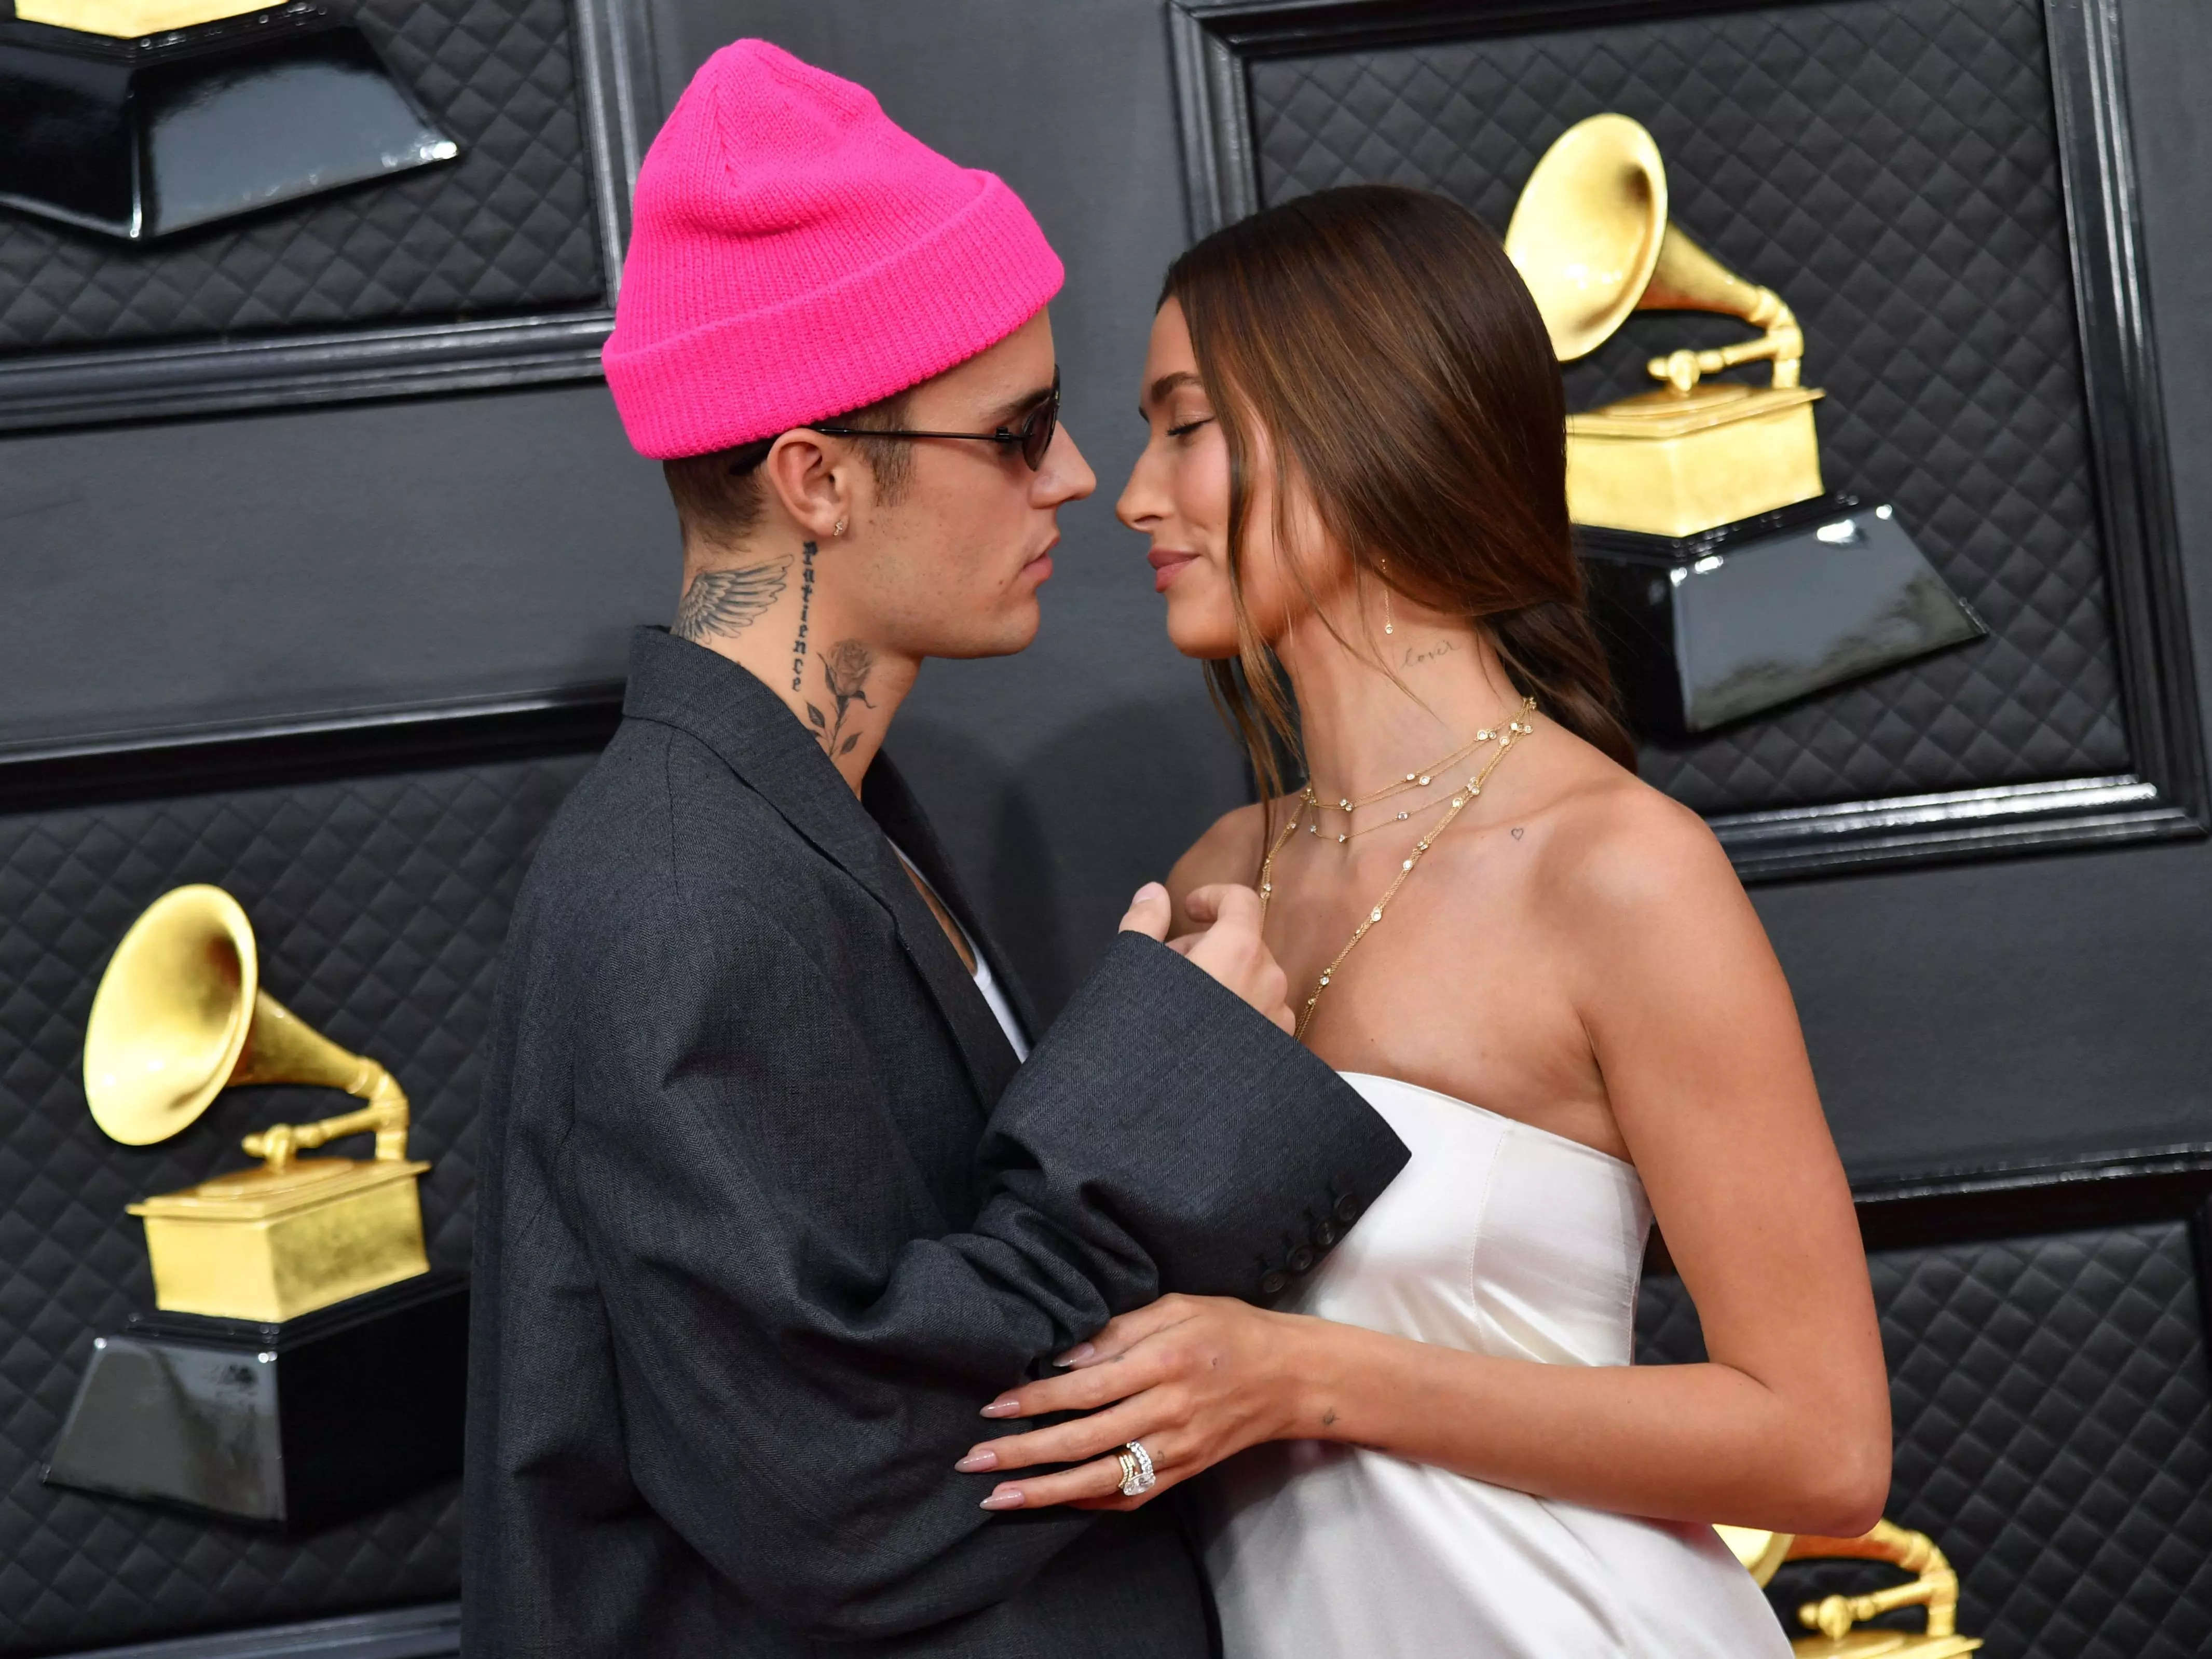 A Complete Timeline Of Hailey Baldwin And Justin Biebers Relationship